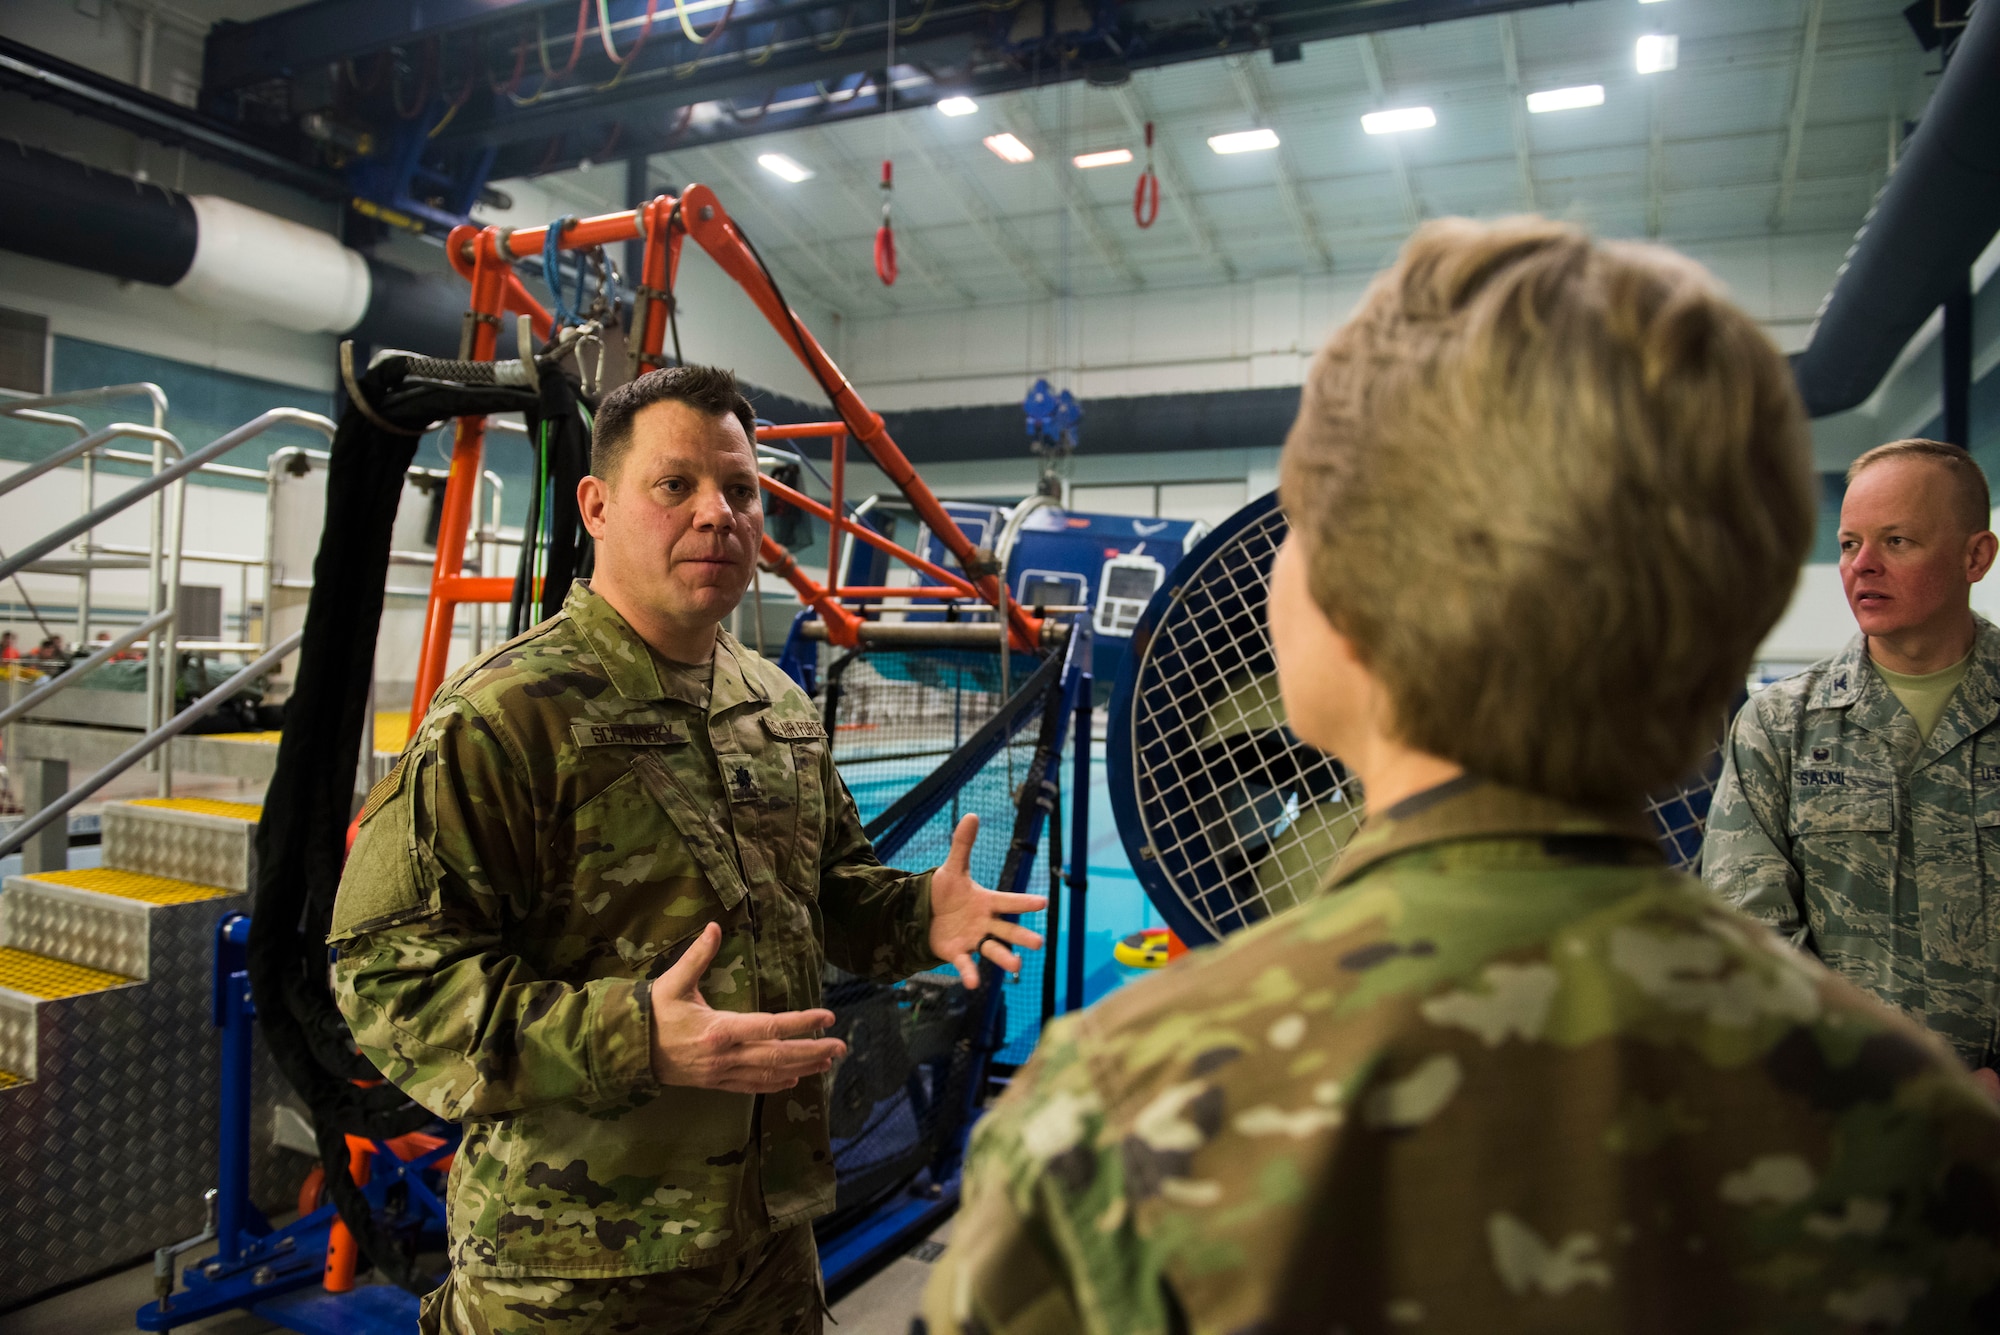 U.S. Air Force Lt. Col. Mark Scepansky, 336th Training Group deputy commander, briefs Gen. Maryanne Miller, Air Mobility Command commander, about the Survival, Evasion, Resistance and Escape water survival course at Fairchild Air Force Base, Washington, March 27, 2019. Miller’s visit offered additional exposure to the variety of missions and challenges Fairchild Airmen from the 92nd Maintenance Group, 92nd Operations Group and SERE face every day to successfully complete the mission. (U.S. Air Force photo by Airman 1st Class Lawrence Sena)